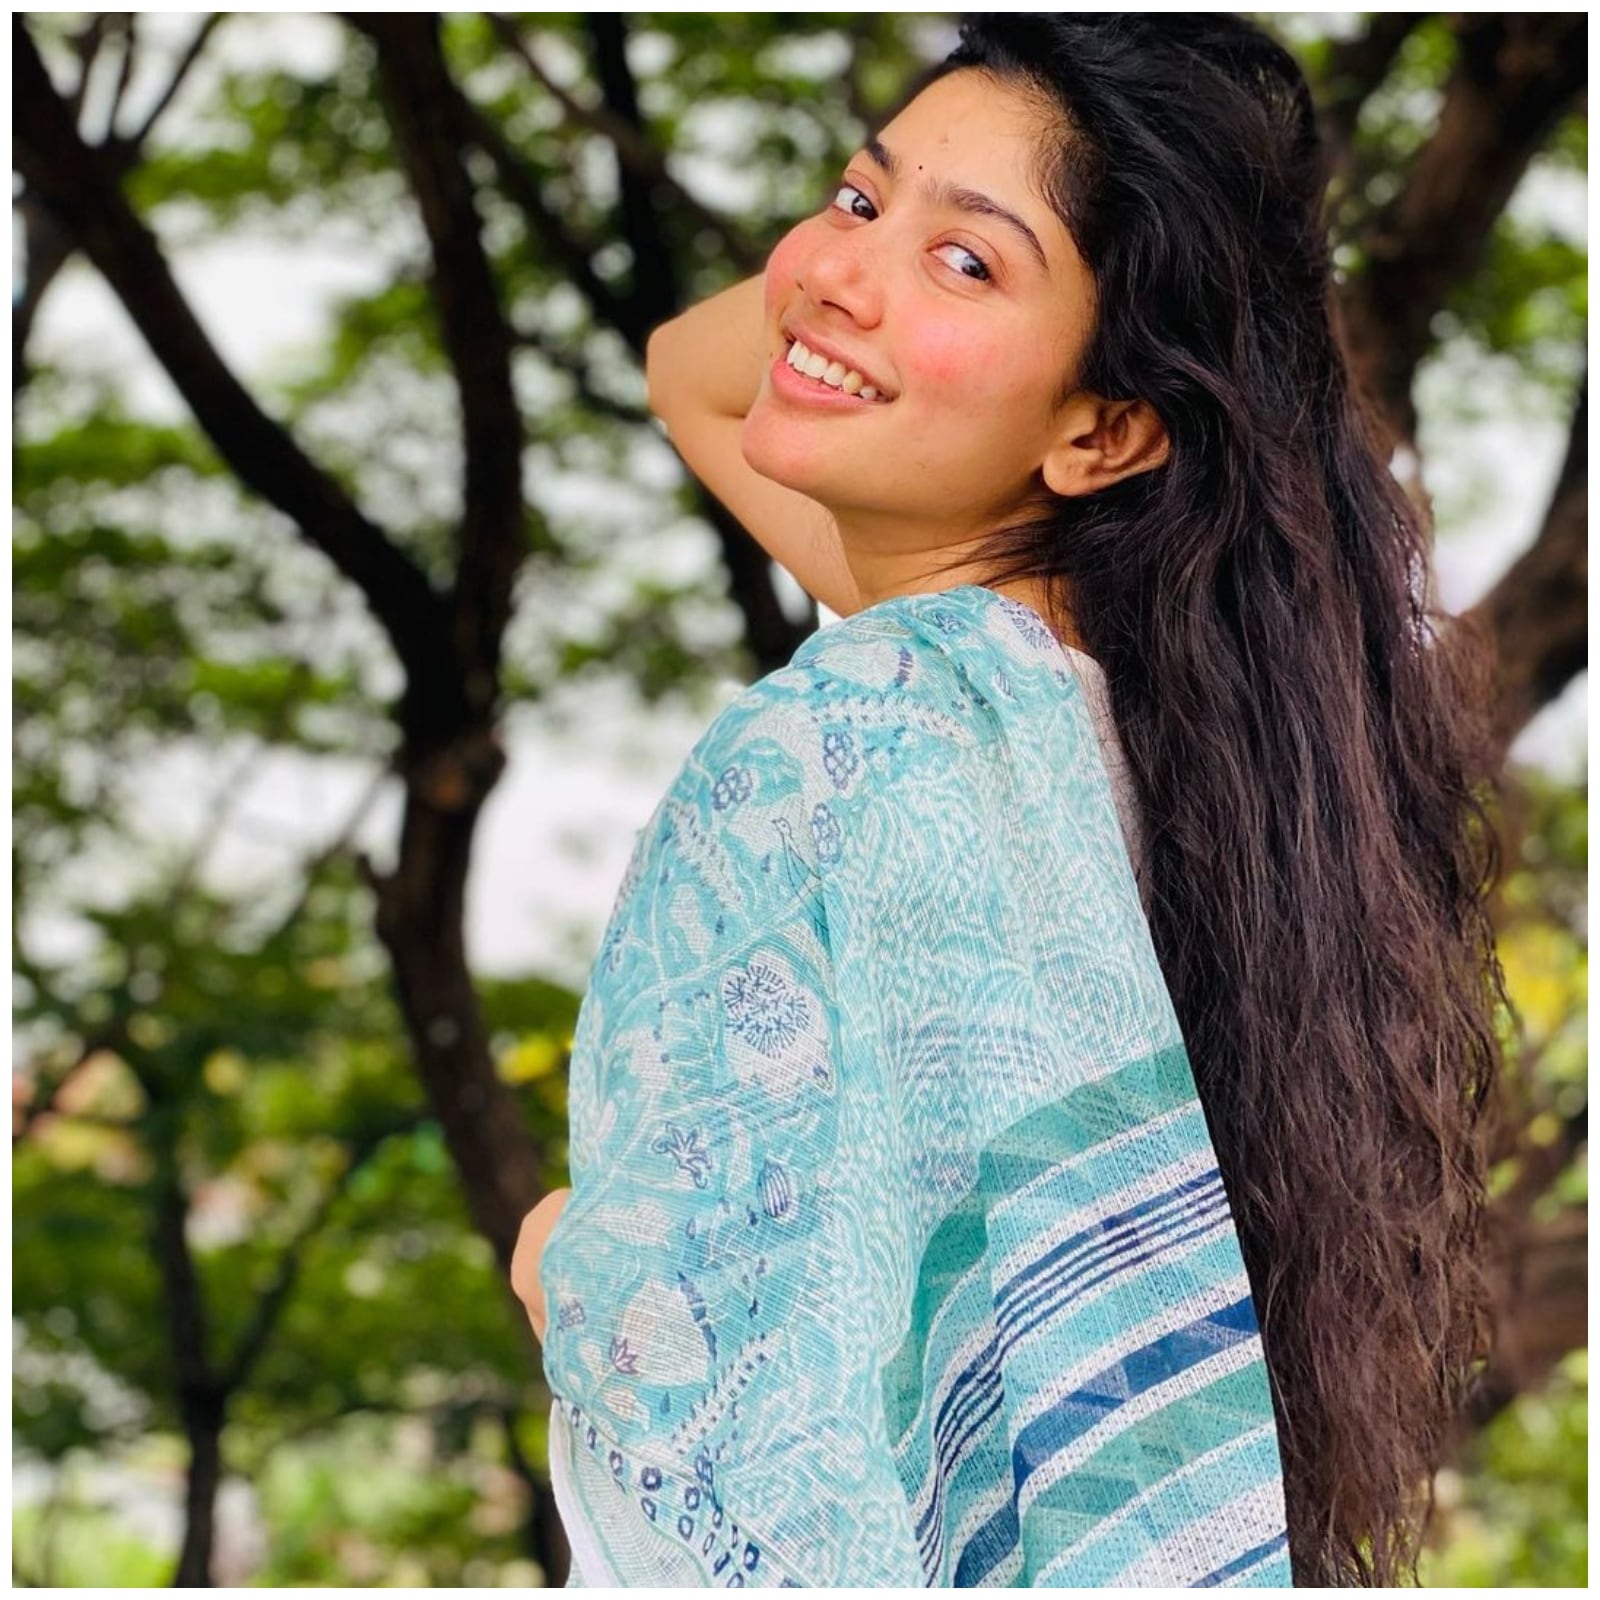 Sai Pallavi Www Xxx Videos - From Assets to Fee Per Film, All You Want to Know About Sai Pallavi - News18